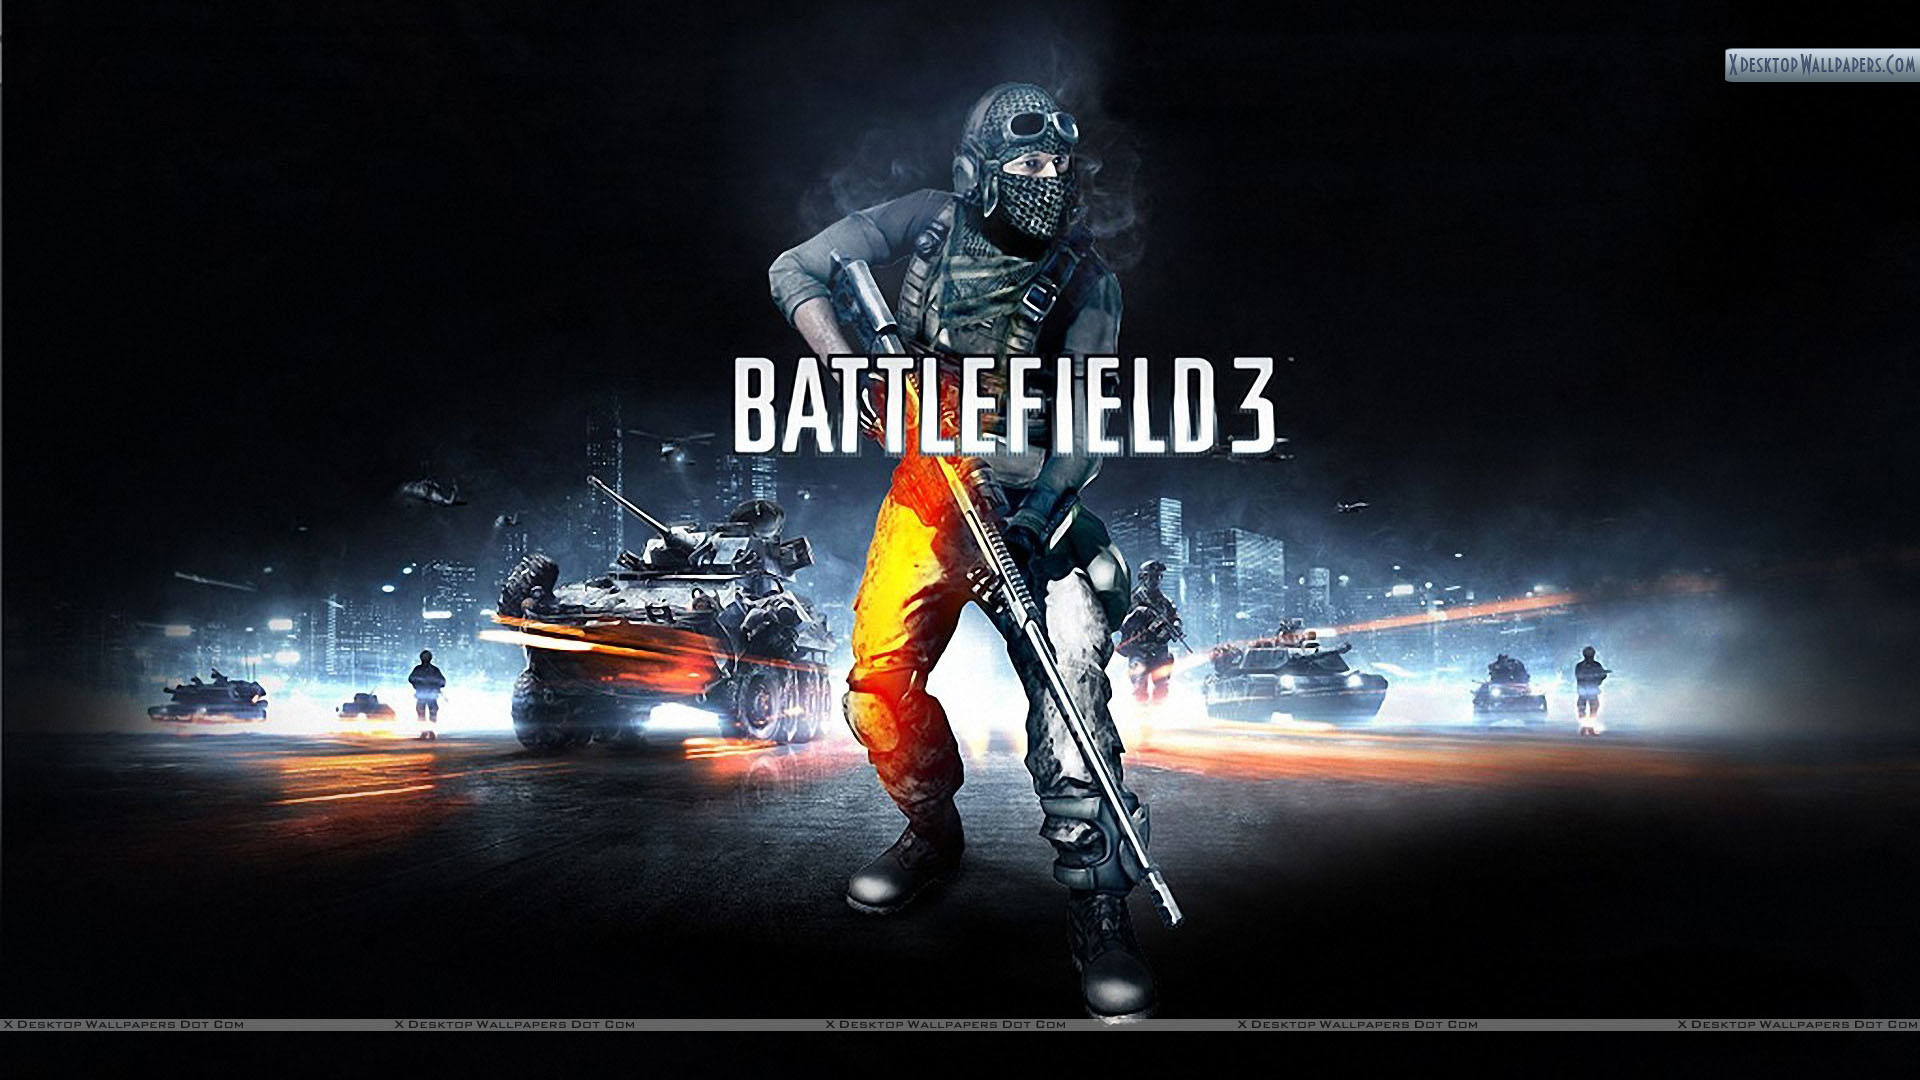 1920x1080 You are viewing wallpaper titled "Battlefield 3 ...